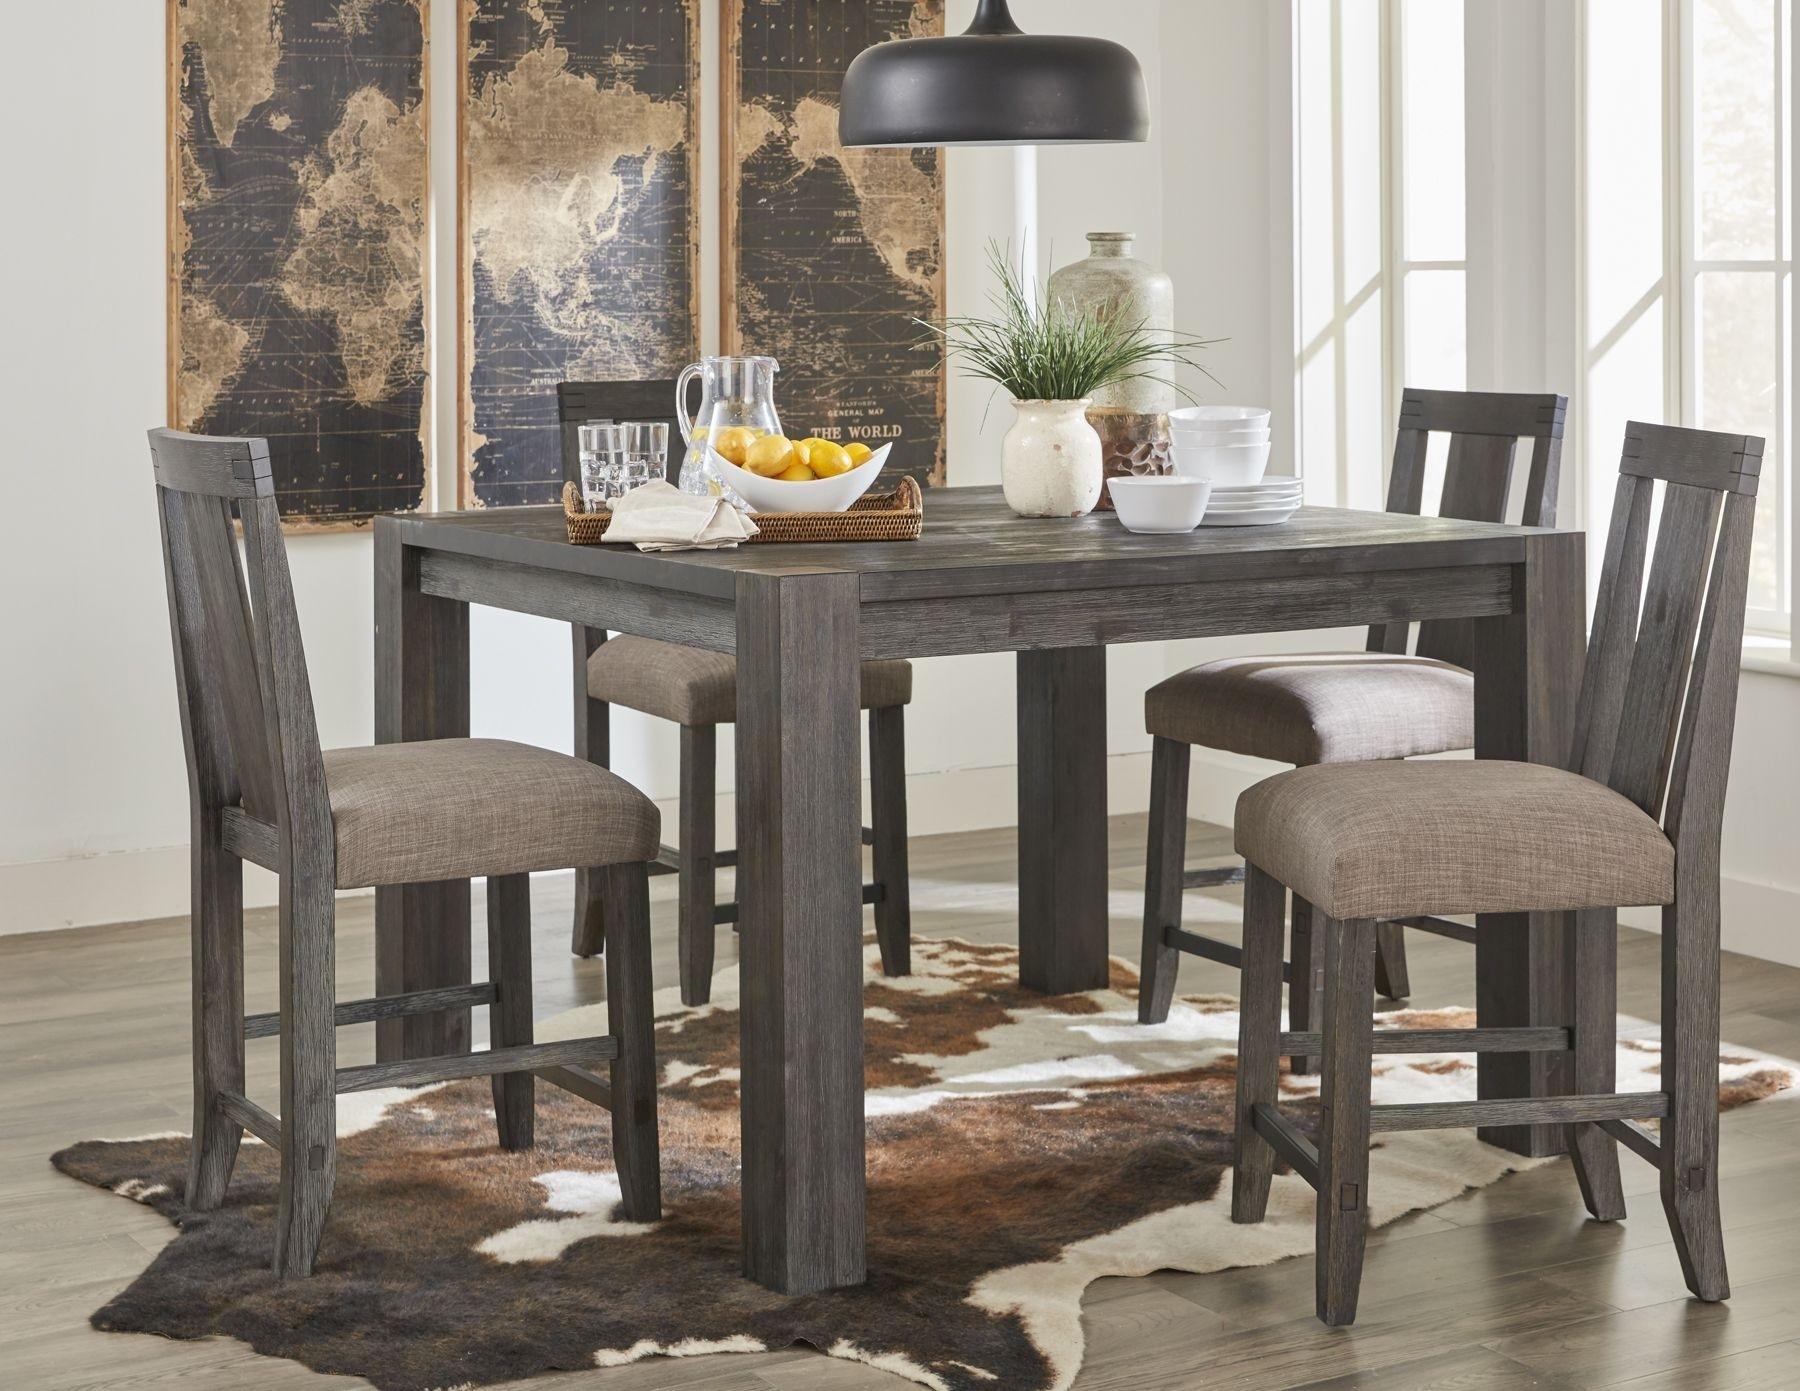 

    
Graphite Finish Acacia Solids Counter Height Set 5Pcs MEADOW by Modus Furniture
